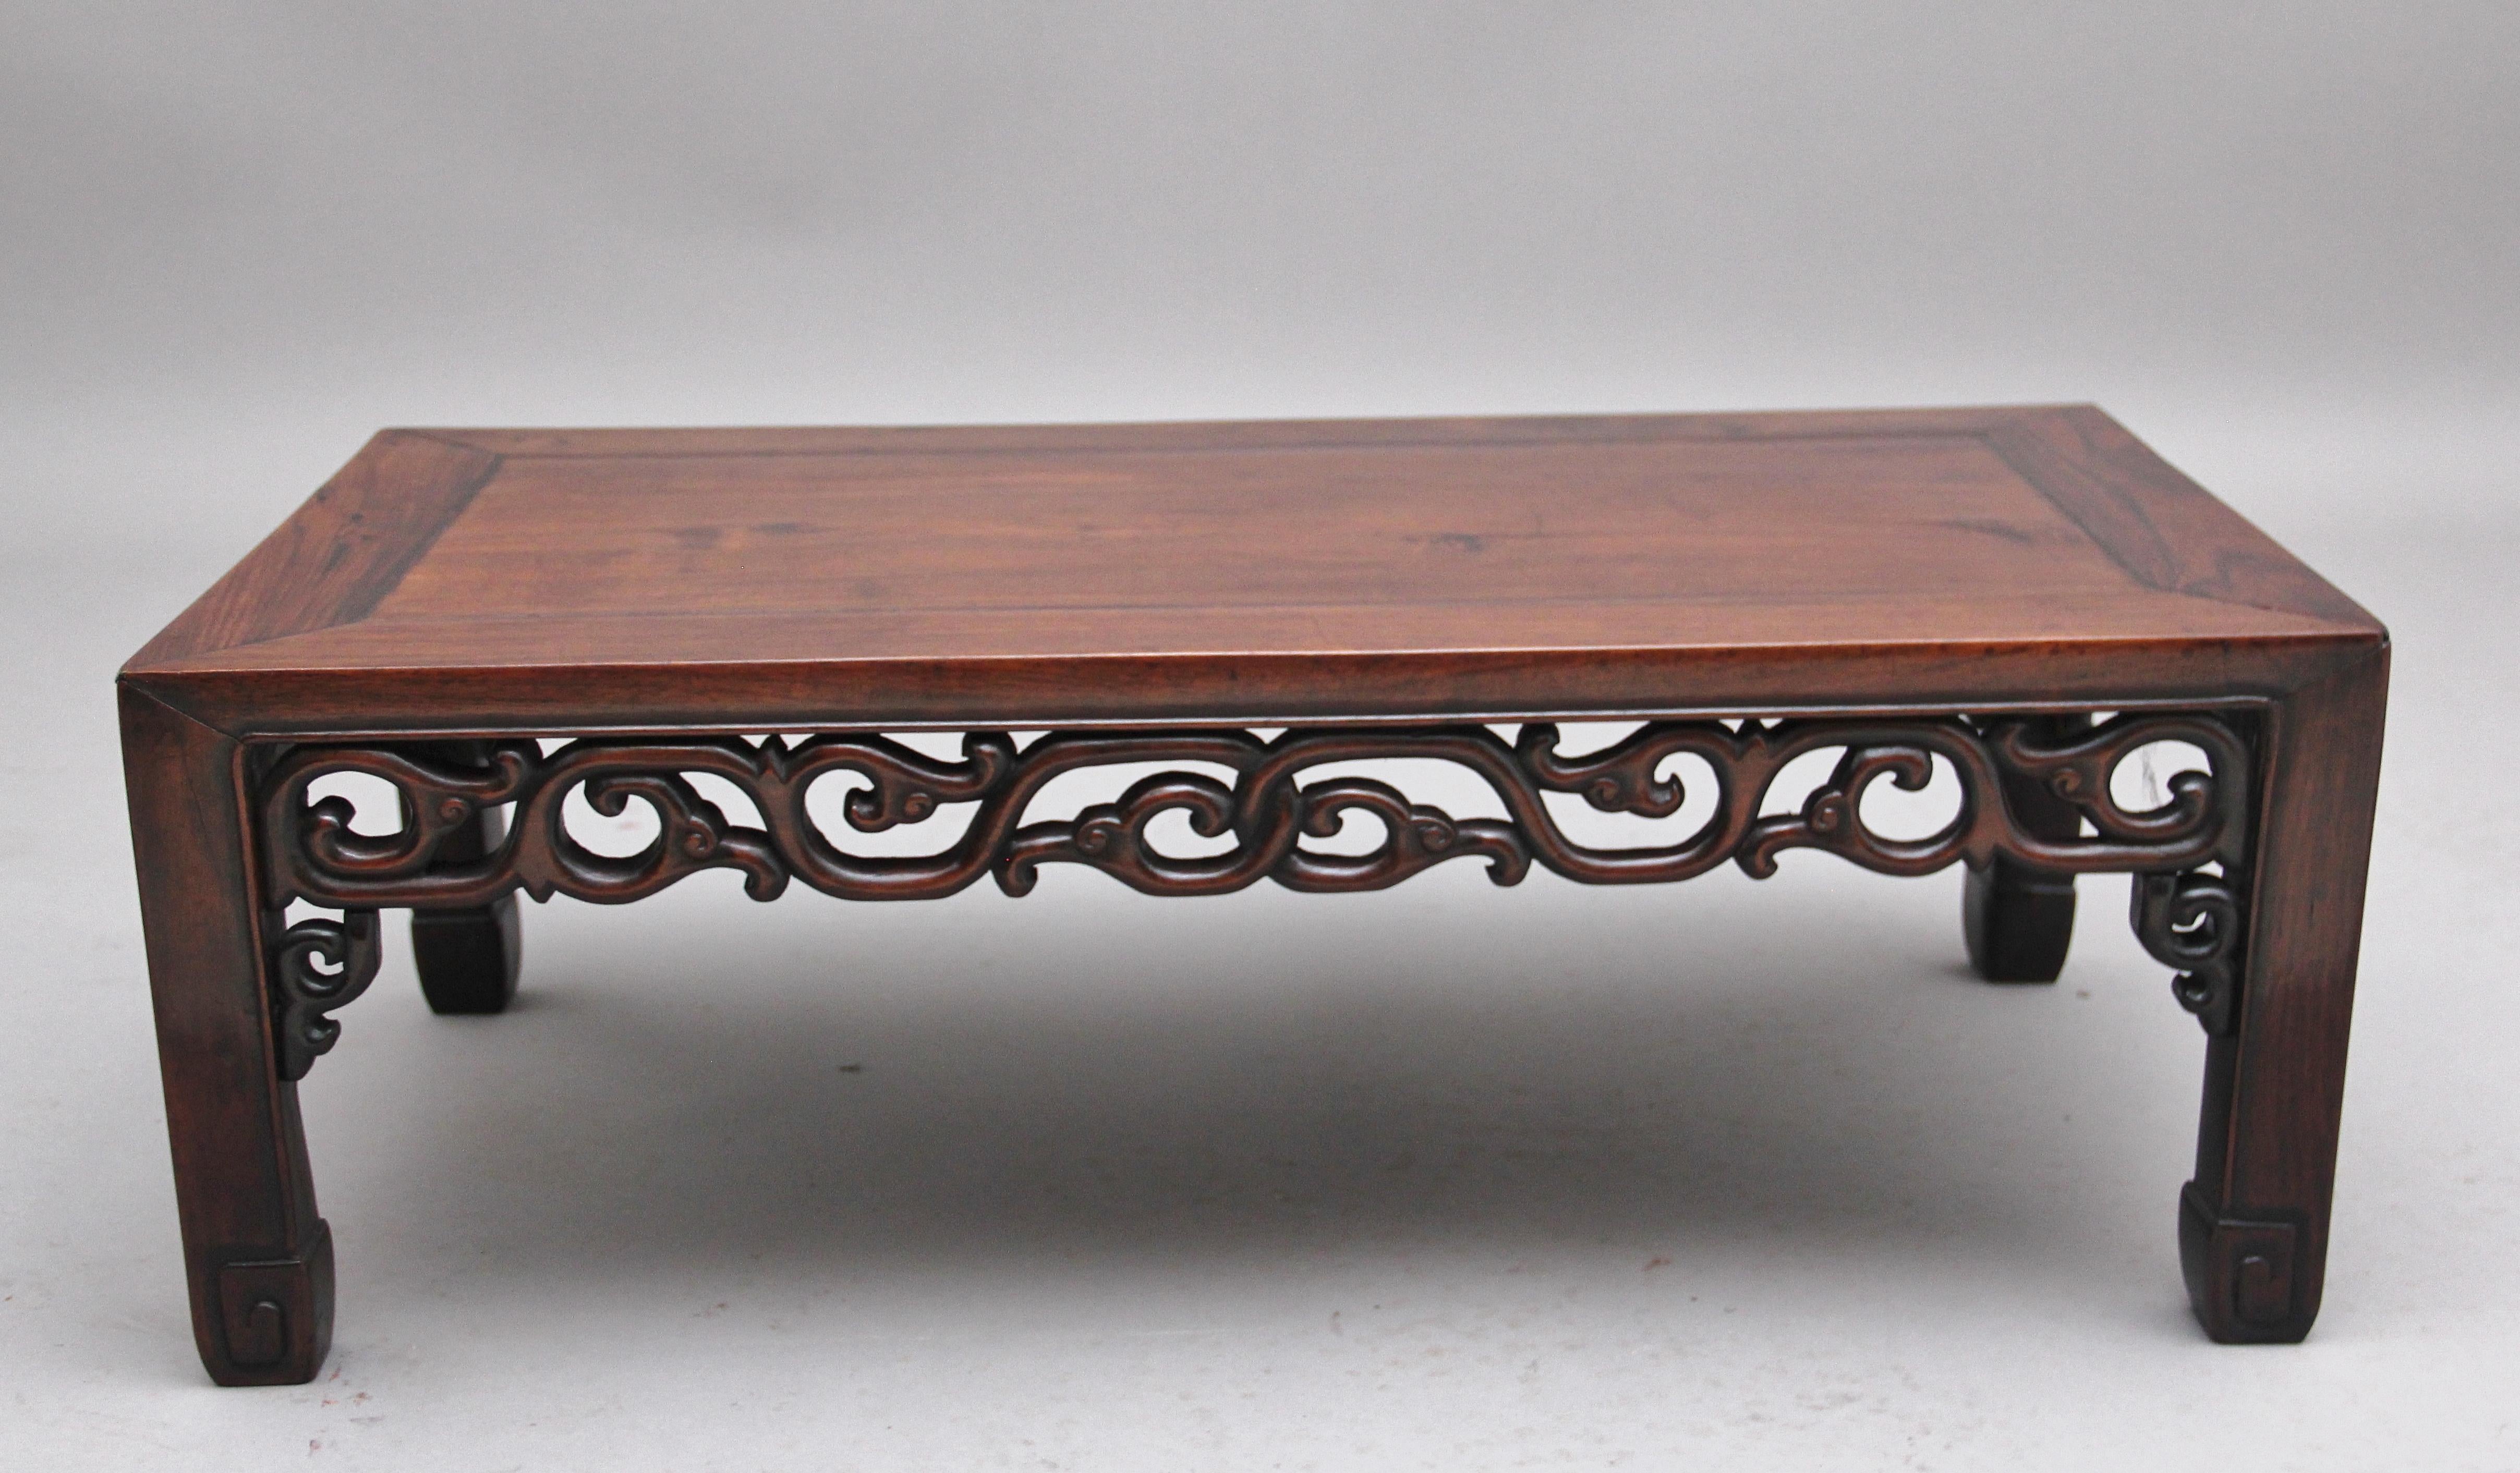 19th century Chinese hongmu low coffee table having a nice figured rectangular top supported on square legs ending on carved and scroll feet, all sides decorated with ornate carving in the traditional Chinese style. Circa 1880.
 